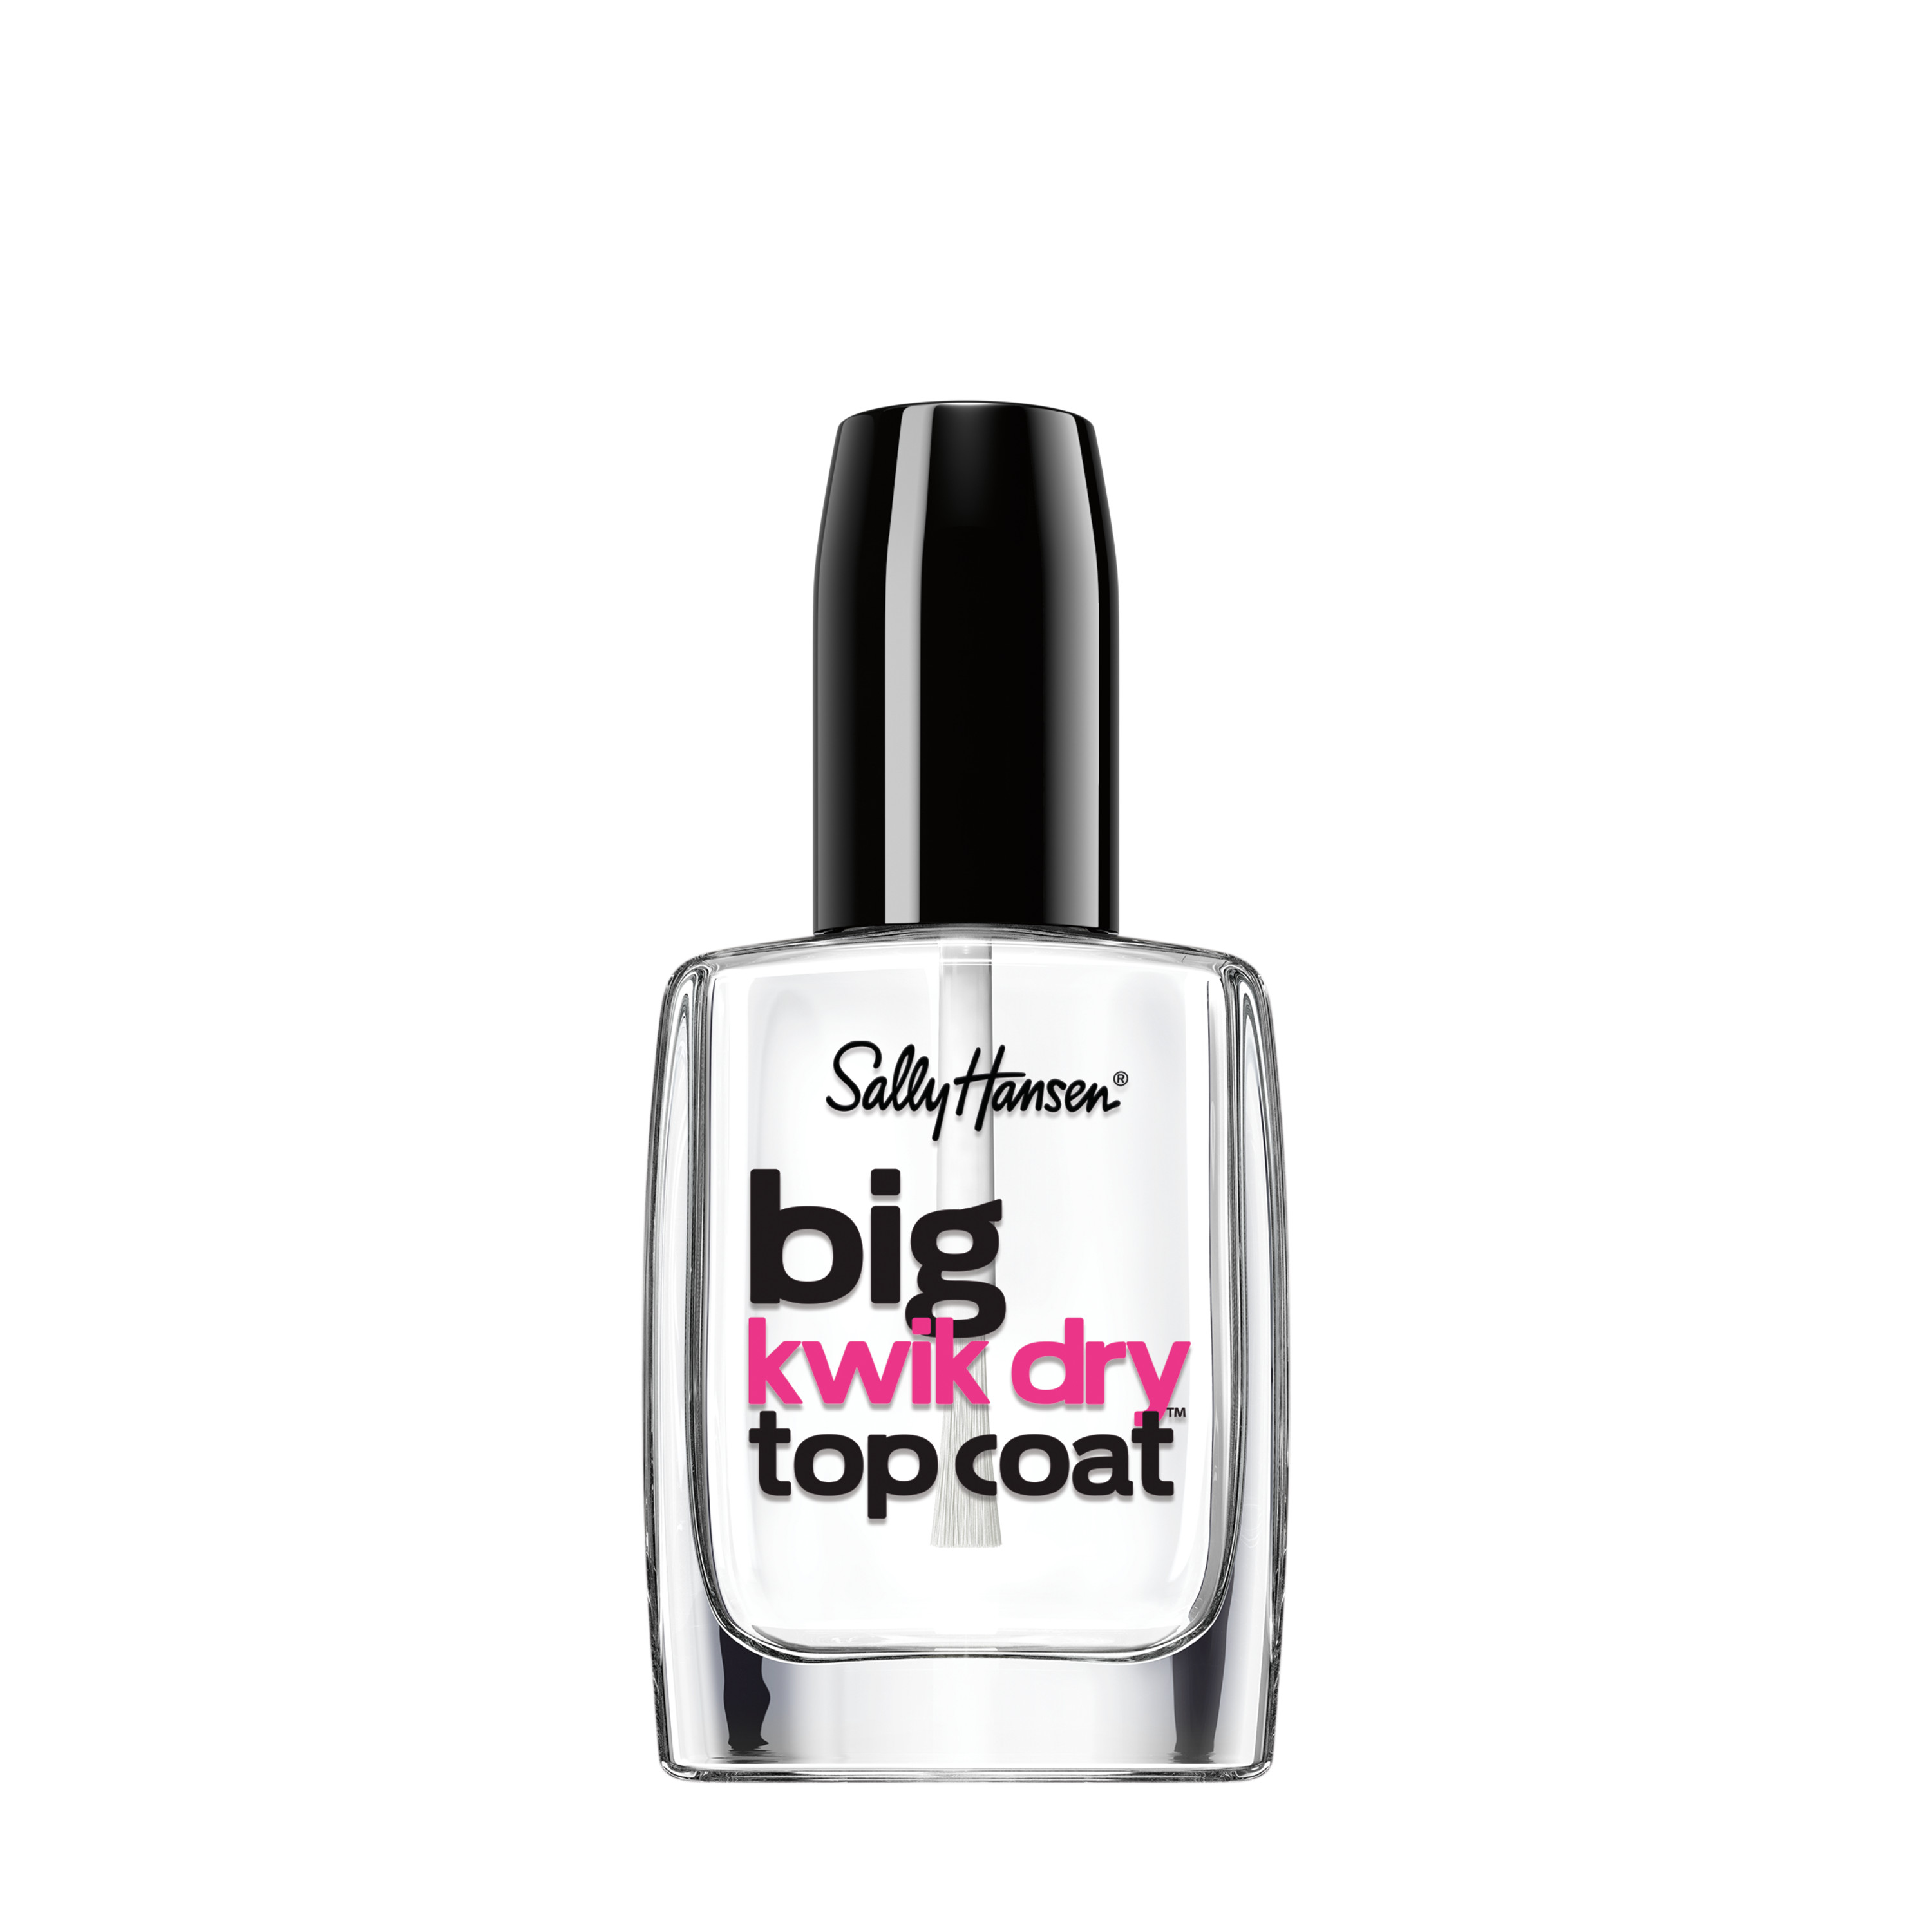 Sally Hansen Big Kwik Dry Top Nail Coat Treatment, High Gloss Finish, 0.4 fl oz , Quick Dry Nail Polish, Protects Nails from Cracking, Chipping, and Splitting, Only One Coat Needed - image 1 of 2